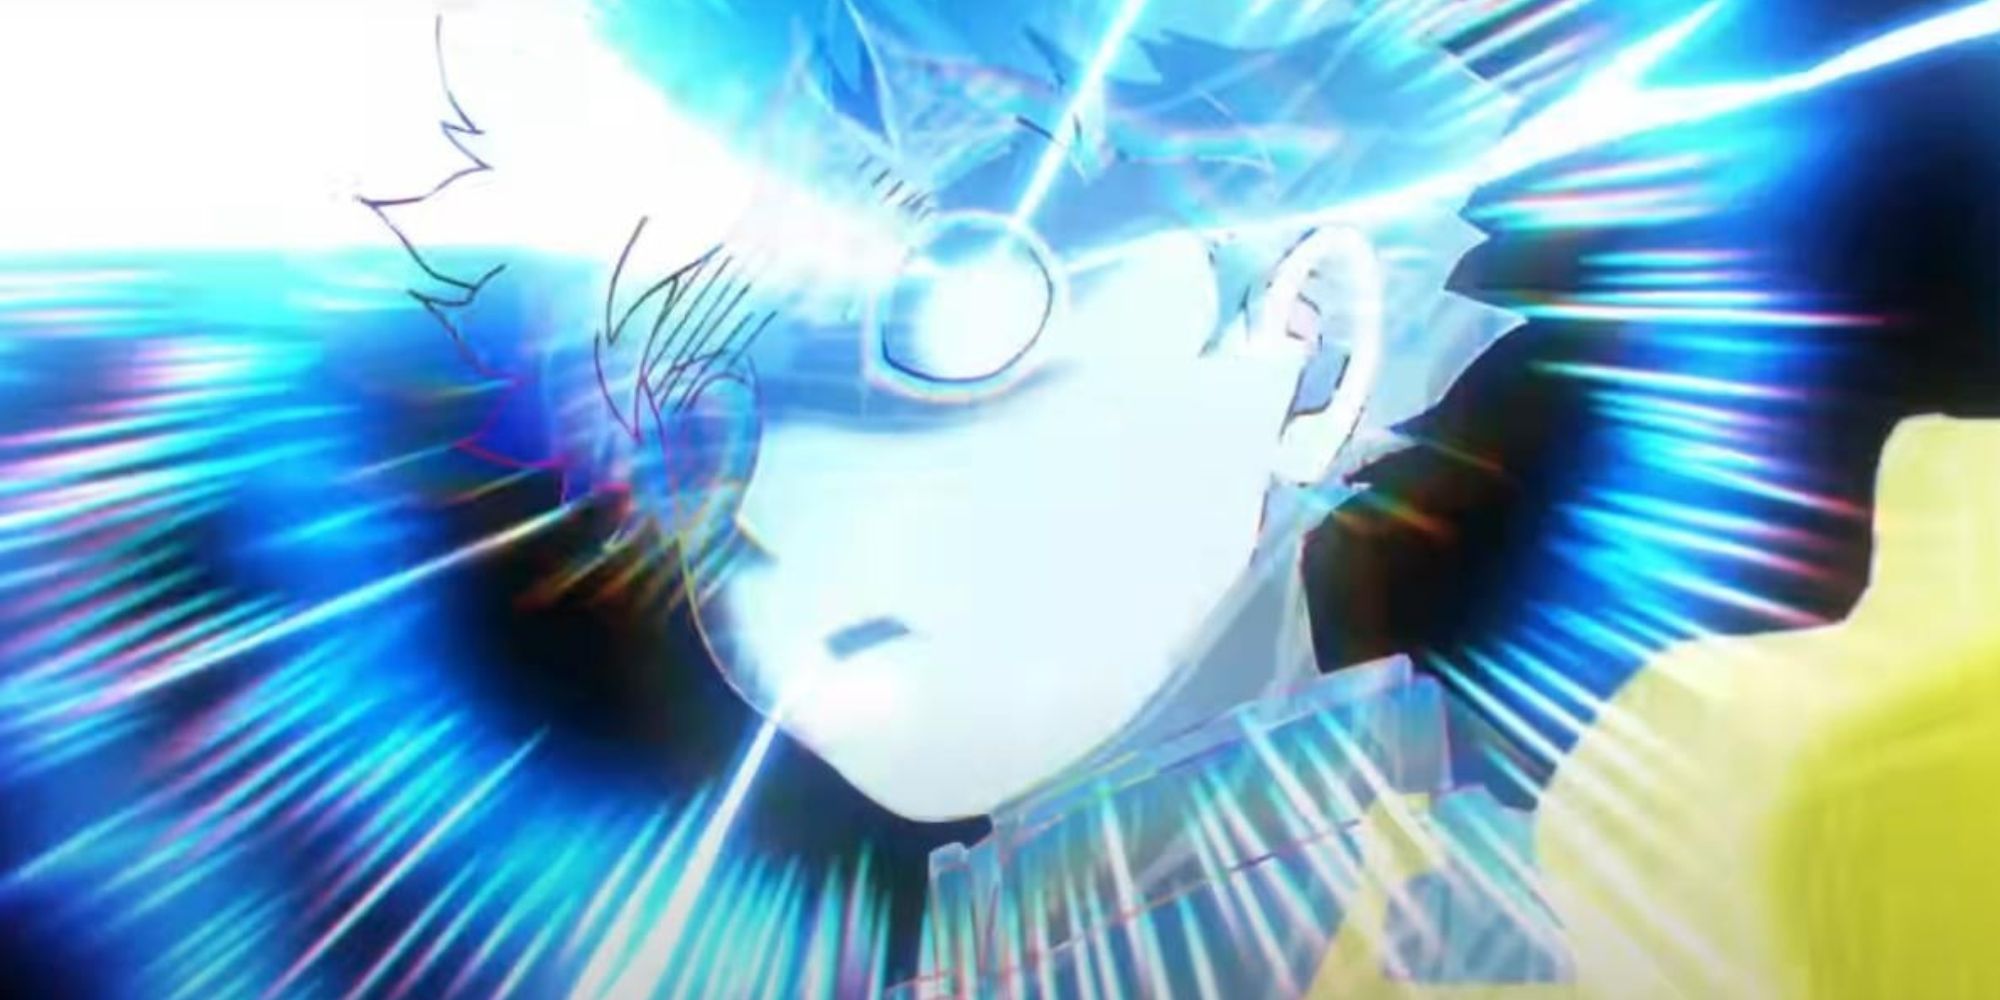 Mob Psycho 100's Season 3 Trailer Has Fans Freaking Out For More Mob